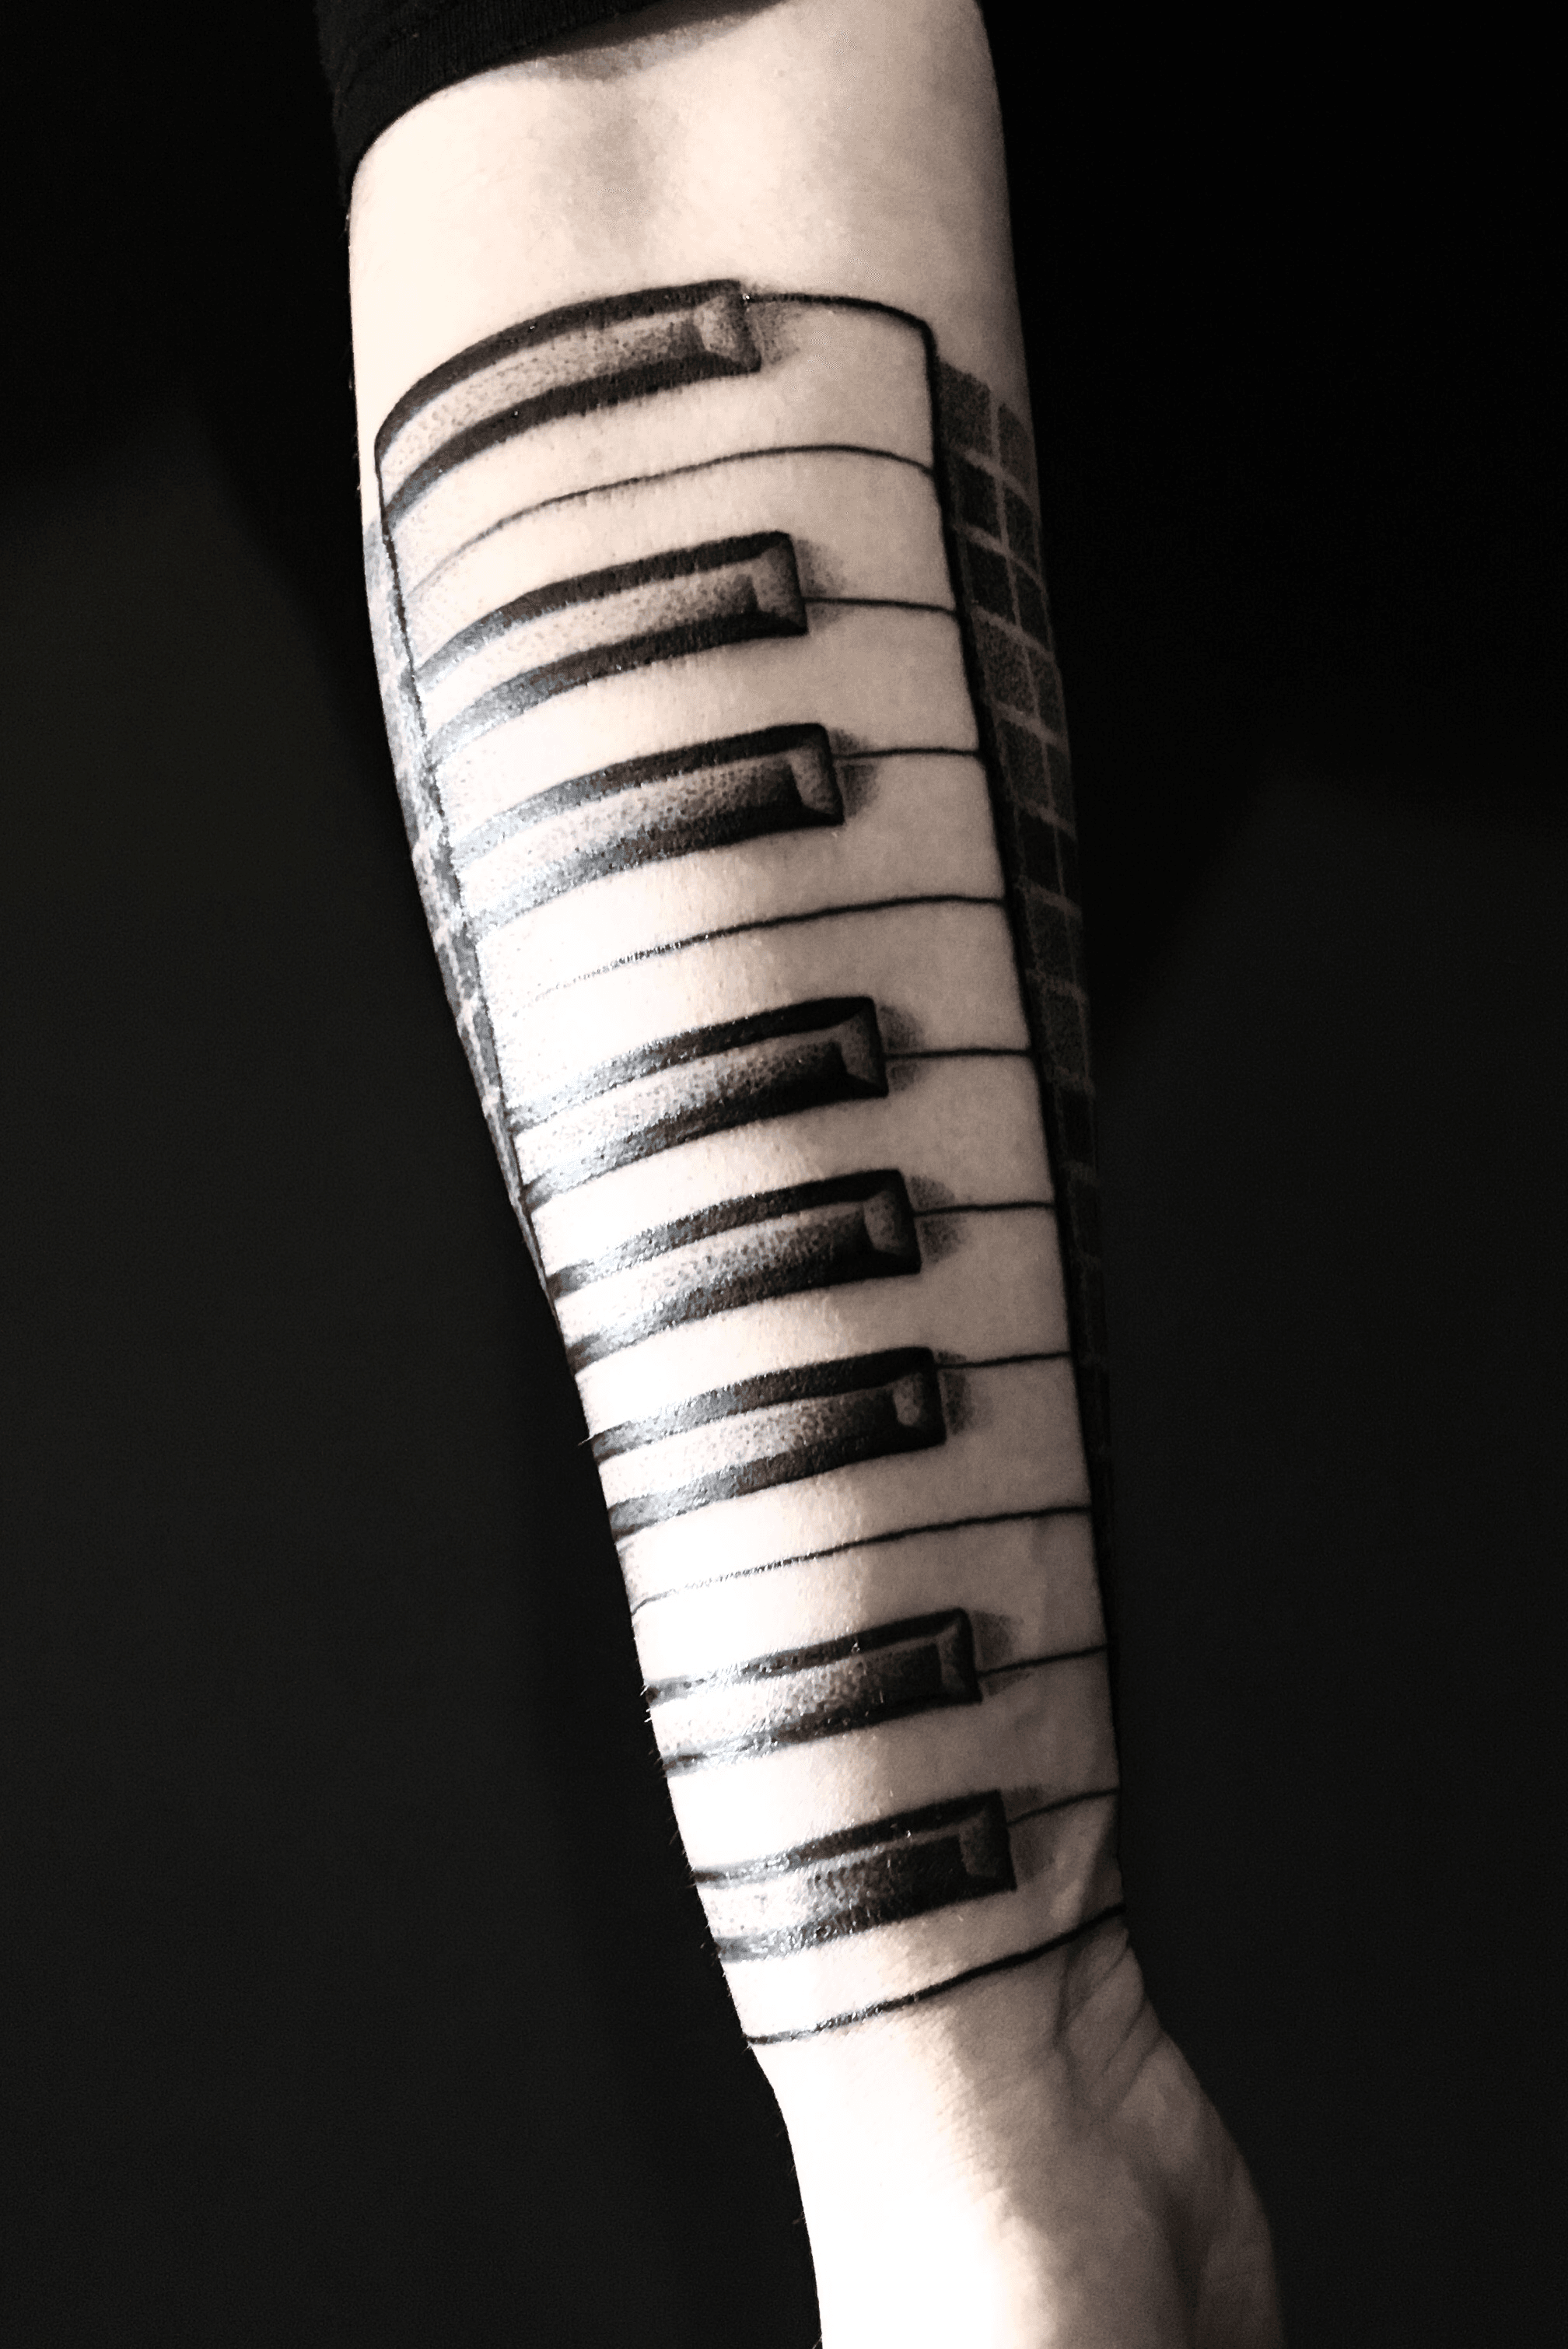 Piano keys done by Carlos Rodriguez at Tattooed Planet in Tempe AZ  r tattoos